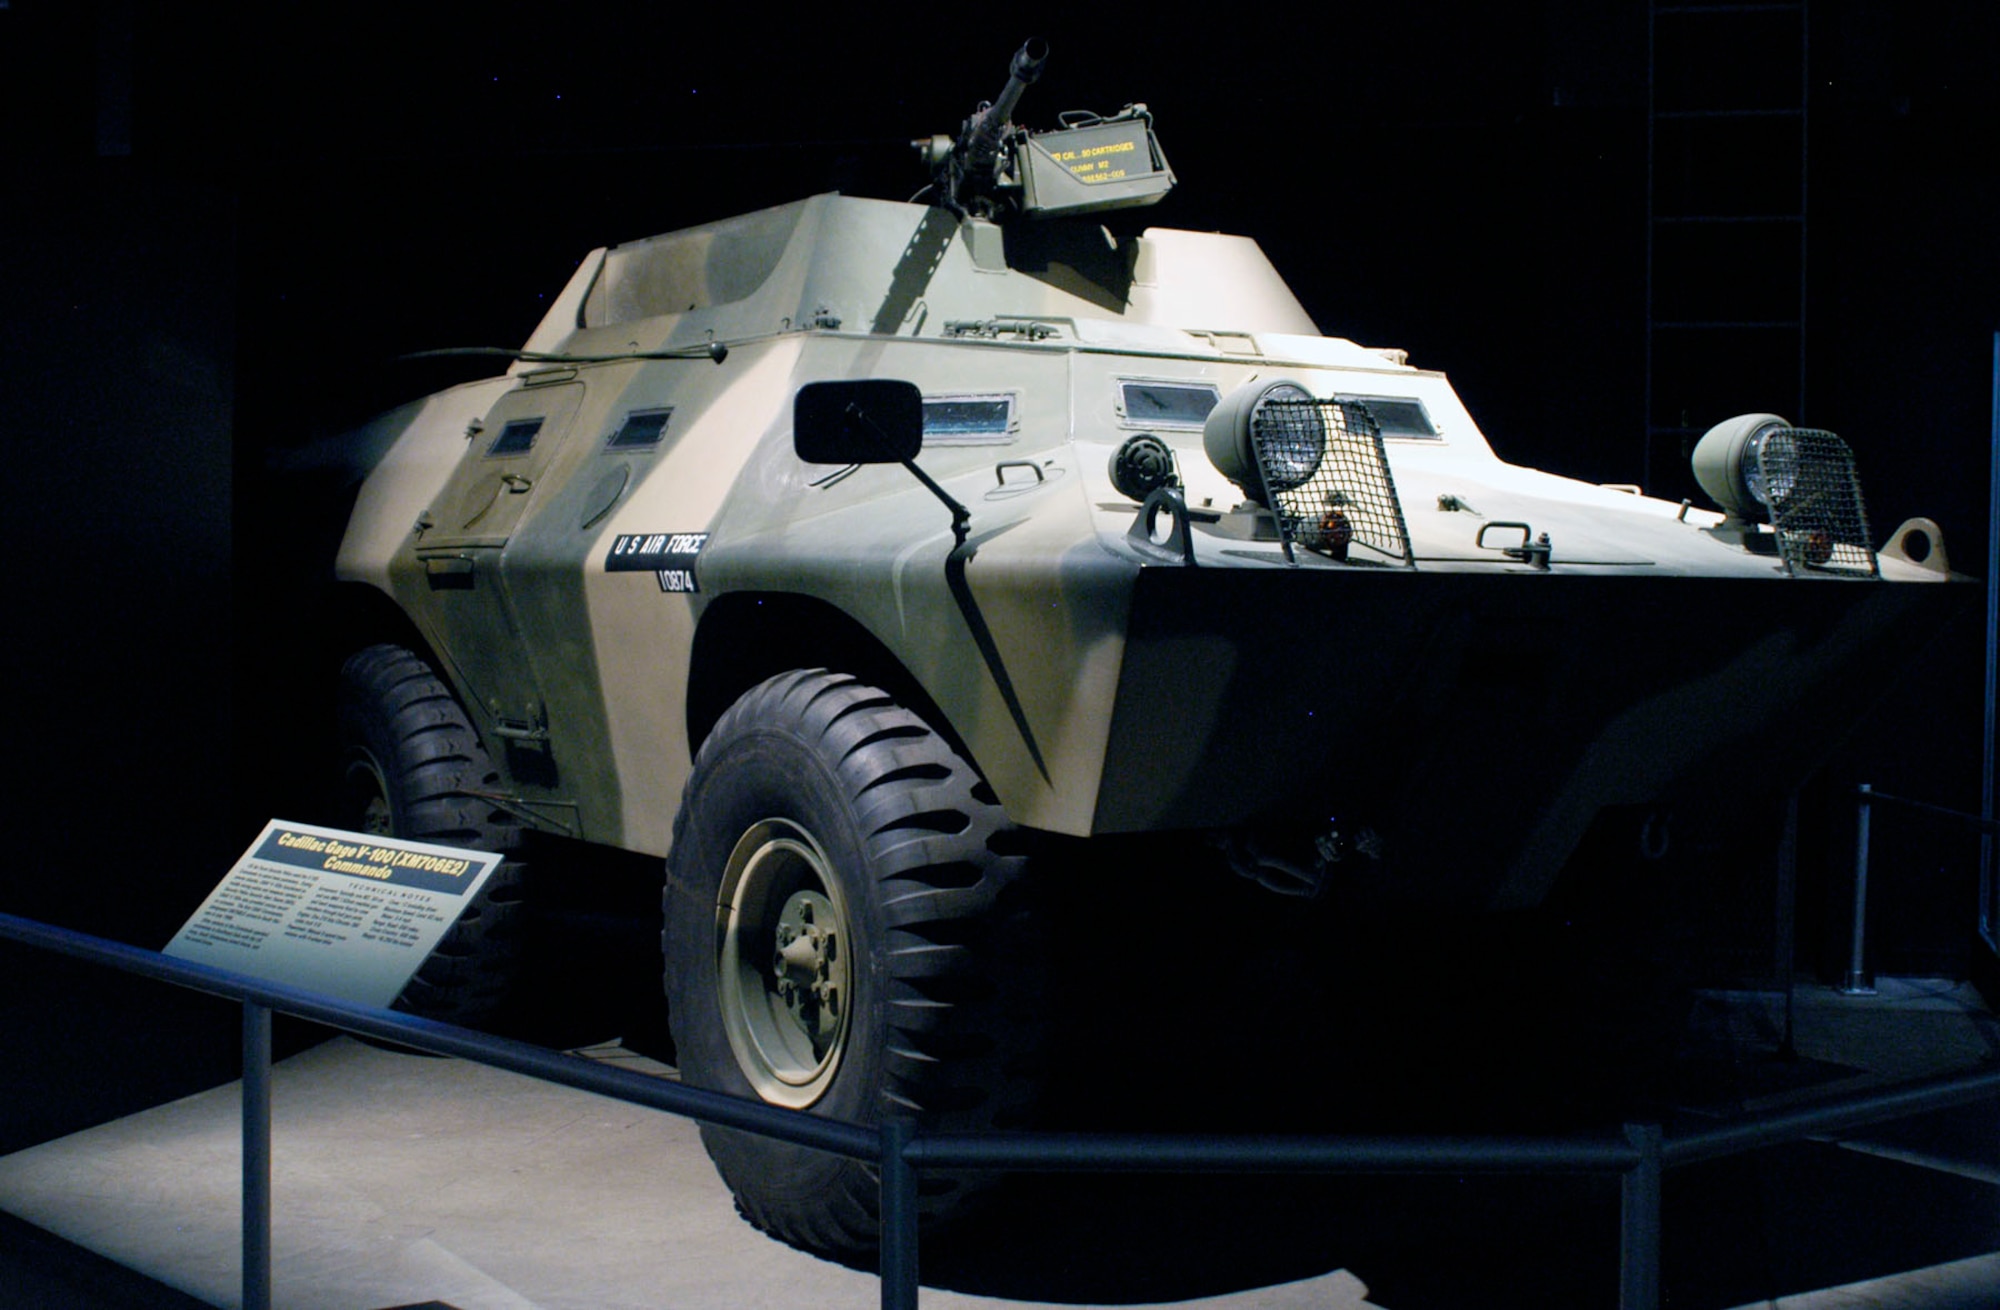 The Cadillac Gage V-100XM 706E2 "Commando" Armored Personnel Carrier was originally designed for convoy escort, reconnaissance or police riot control. The V-100, designated XM 706E2 by the USAF, was employed by Air Force personnel for base perimeter defense during the war in Southeast Asia. (U.S. Air Force photo)